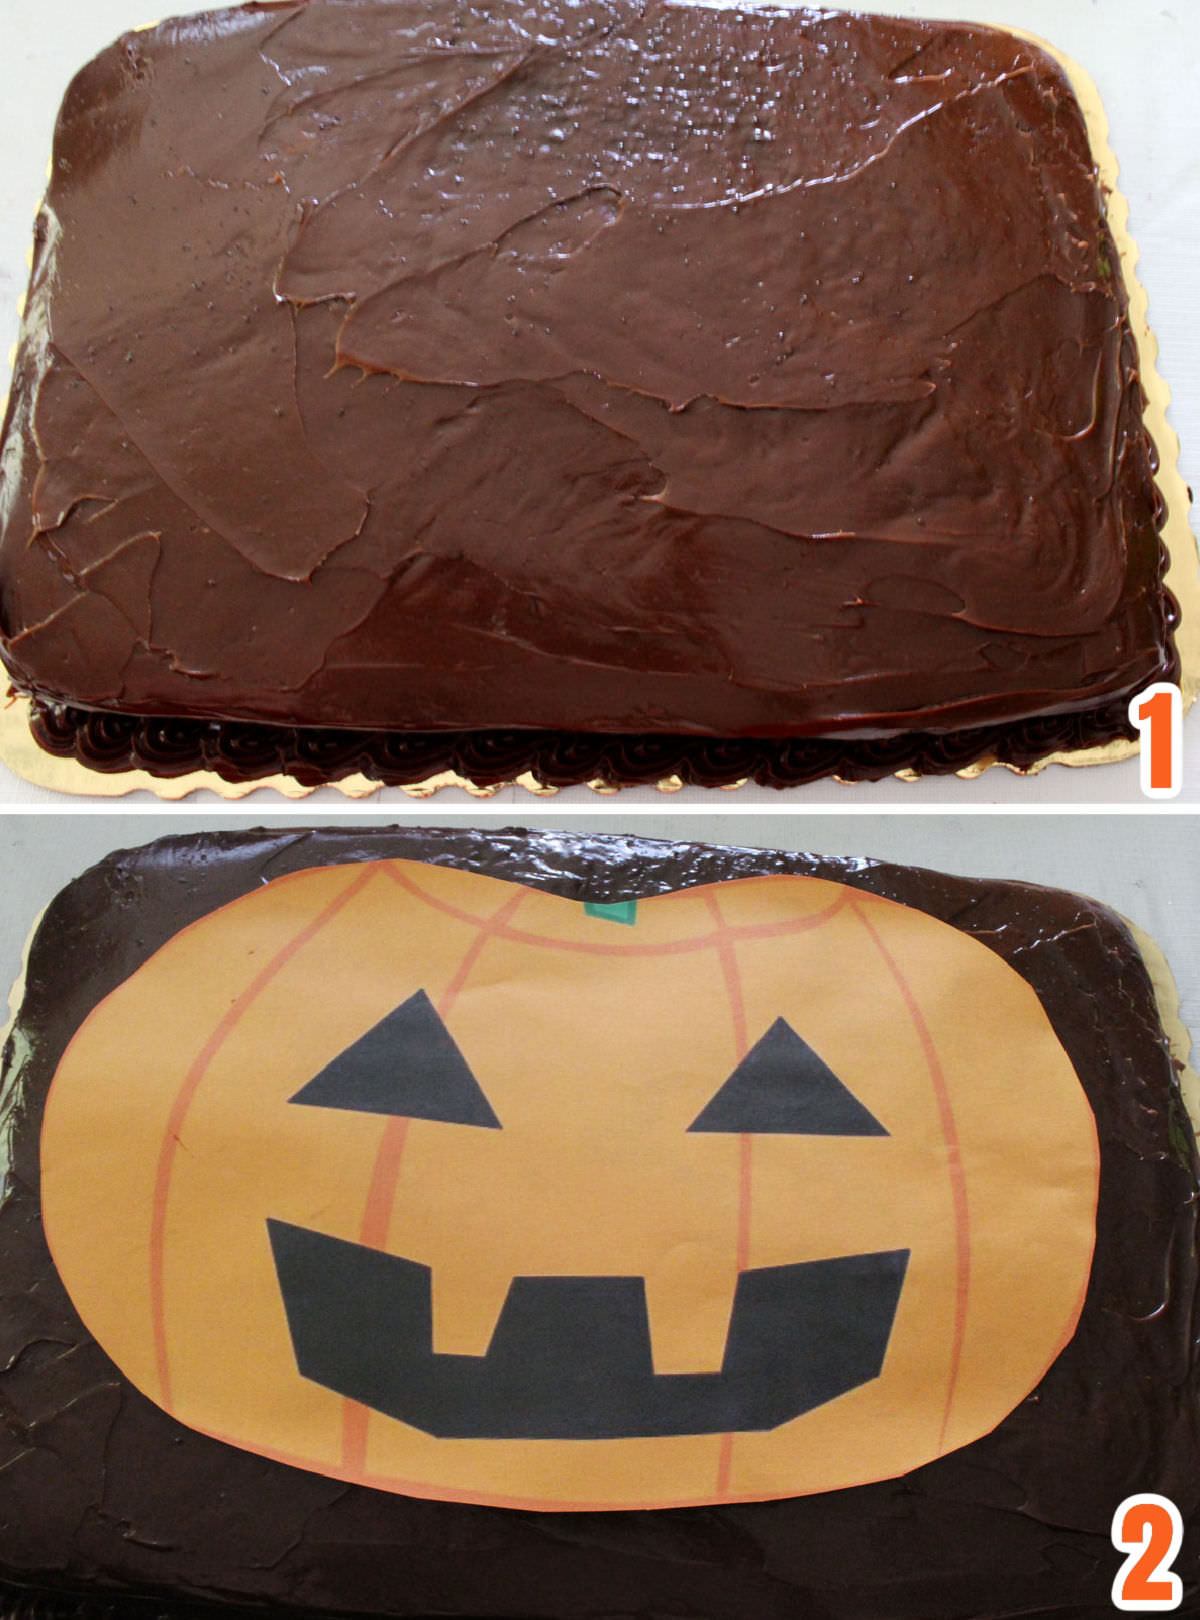 Collage image showing how to trace the shape of a Jack o' Lantern on a store-bought sheet cake.